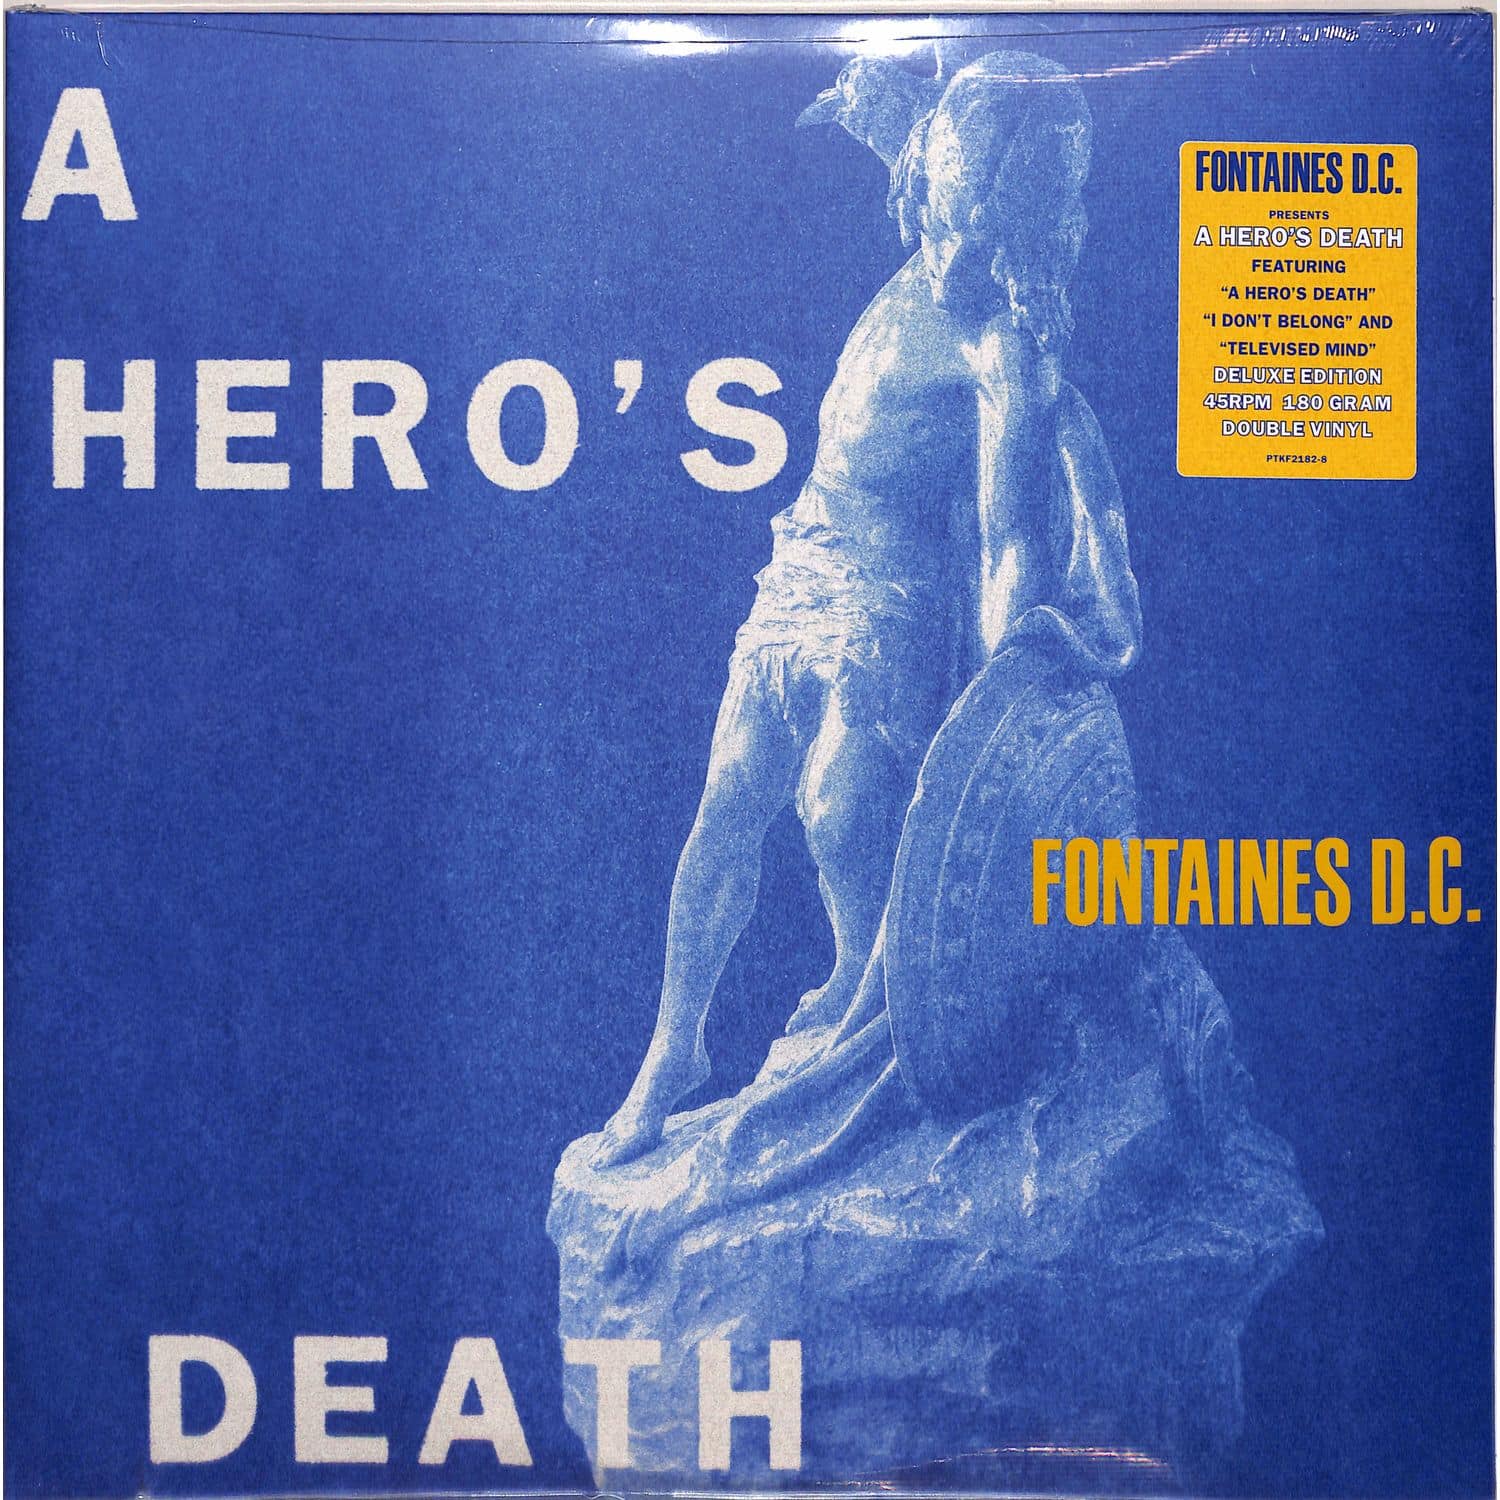 Fontaines D.C. - A HERO S DEATH 